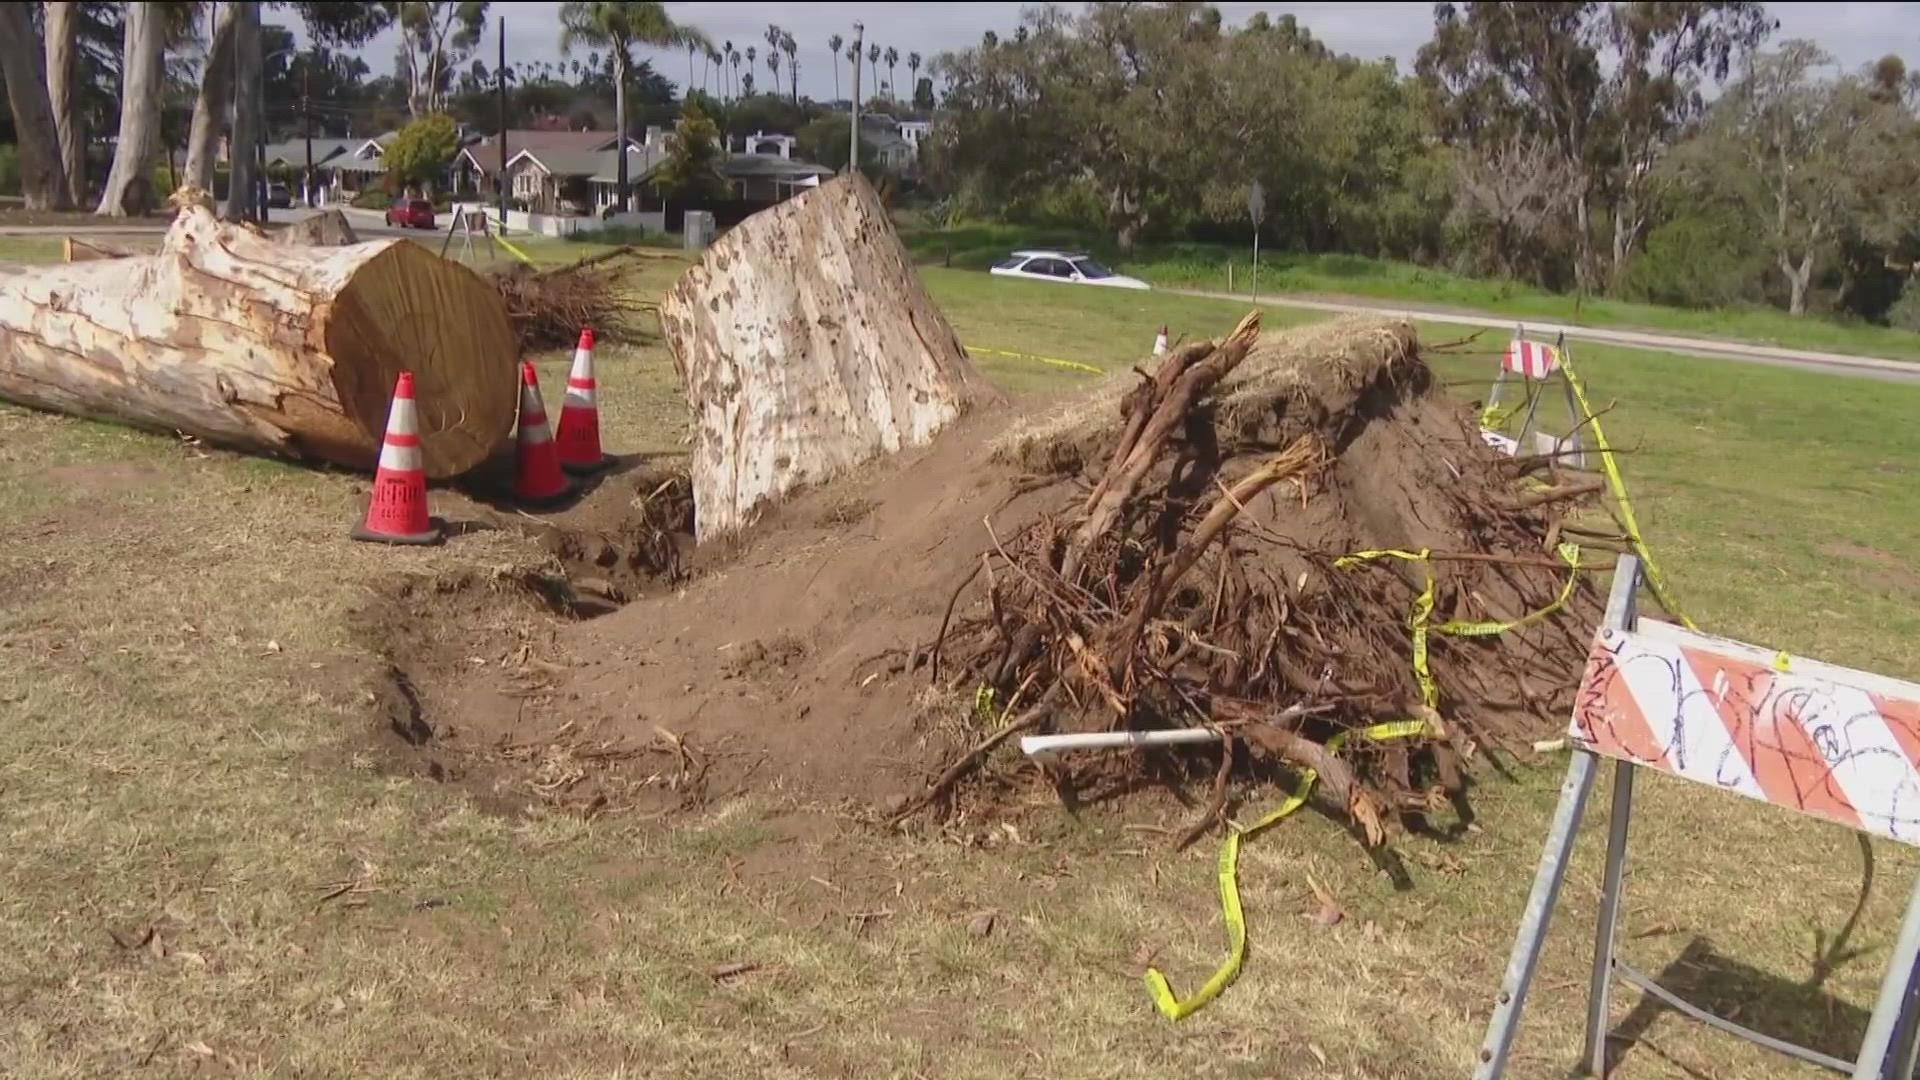 In January, a storm toppled more than 35 trees in Balboa Park, the main reason being ground saturation after all of the rain.